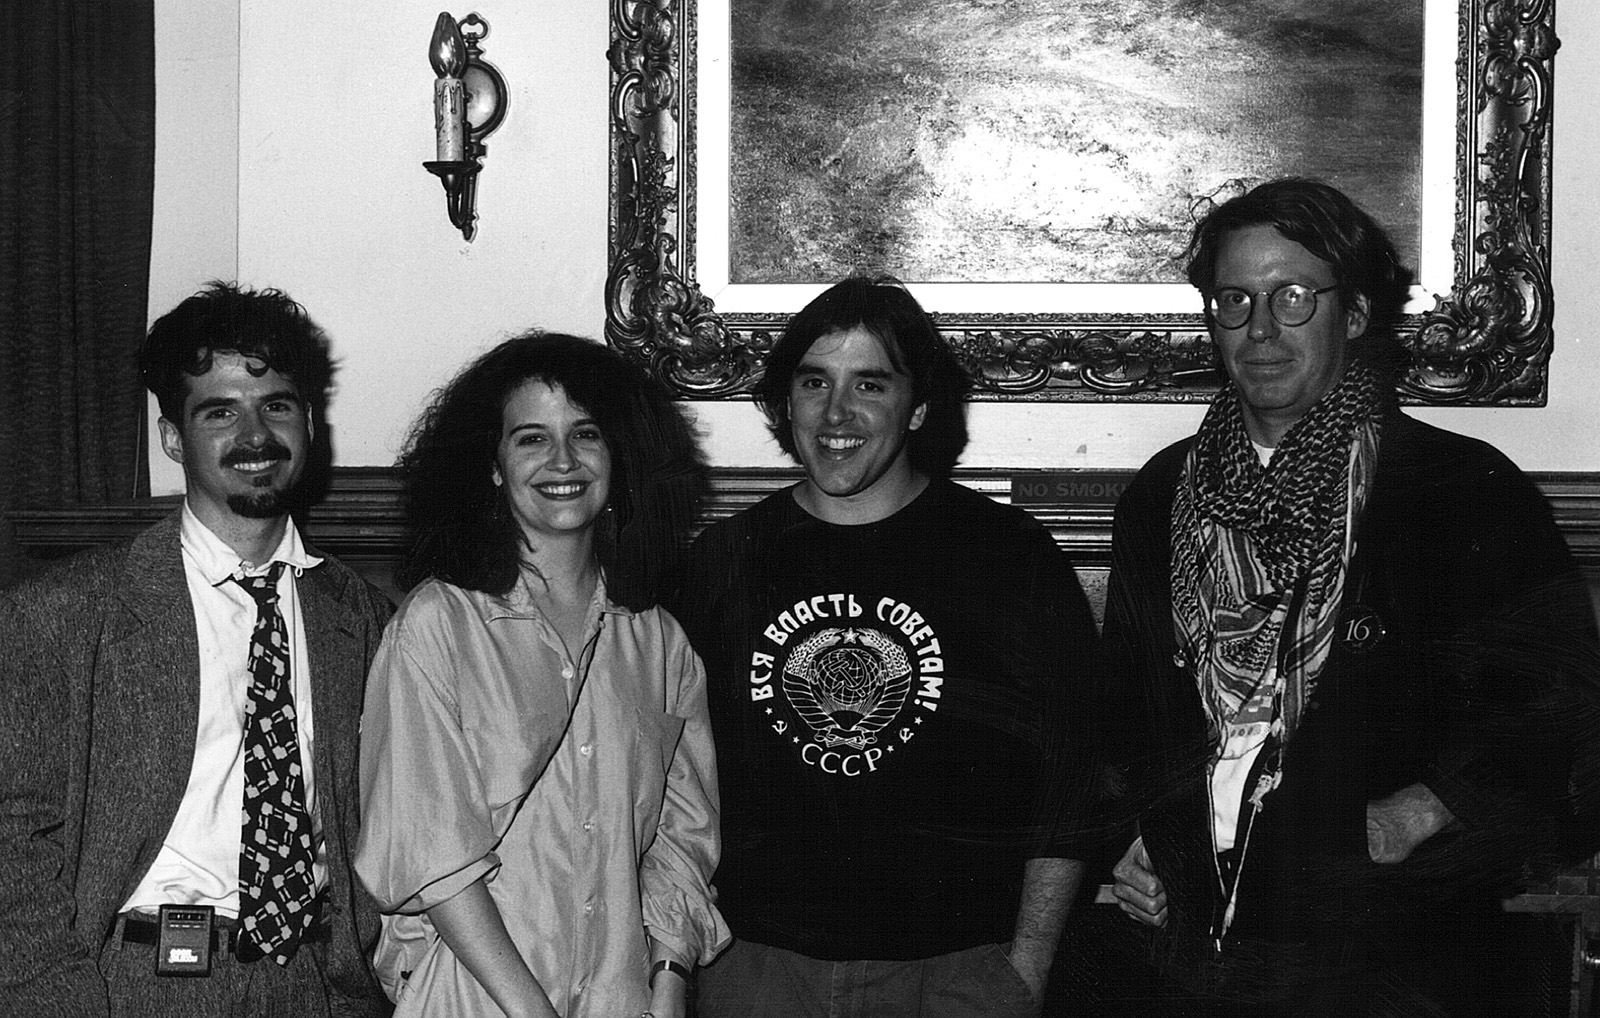 Director, Richard Linklater (second from right), poses with others from his film, Slacker, in the Harvard Exit lobby